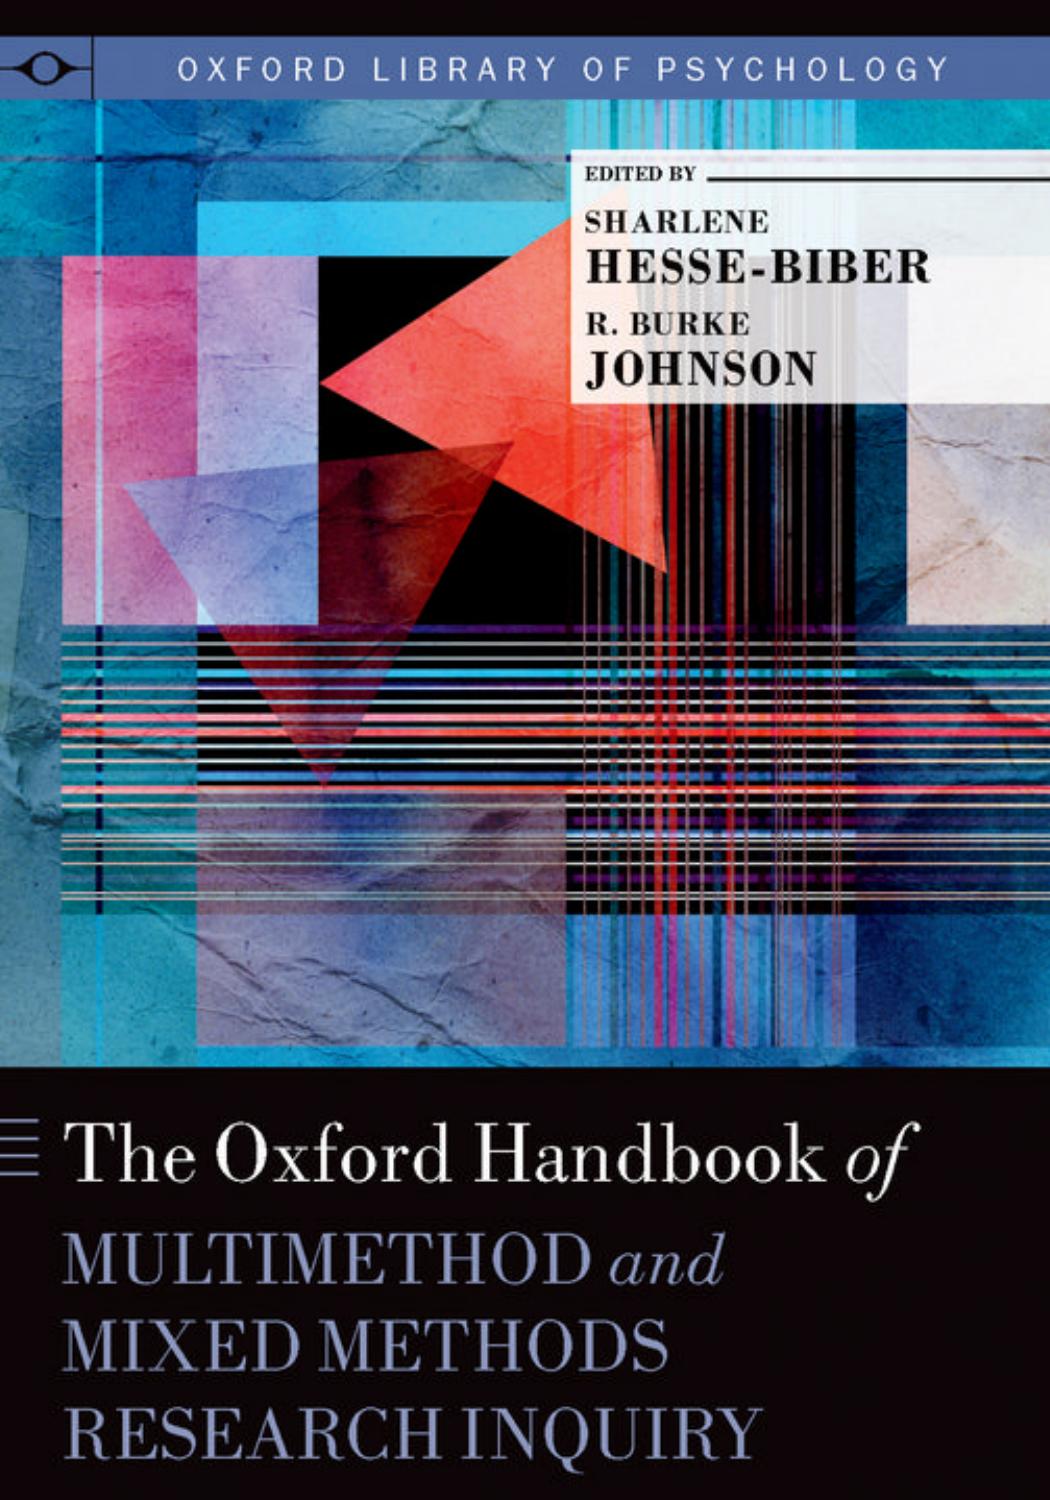 The Oxford Handbook of Multimethod and Mixed Methods Research Inquiry